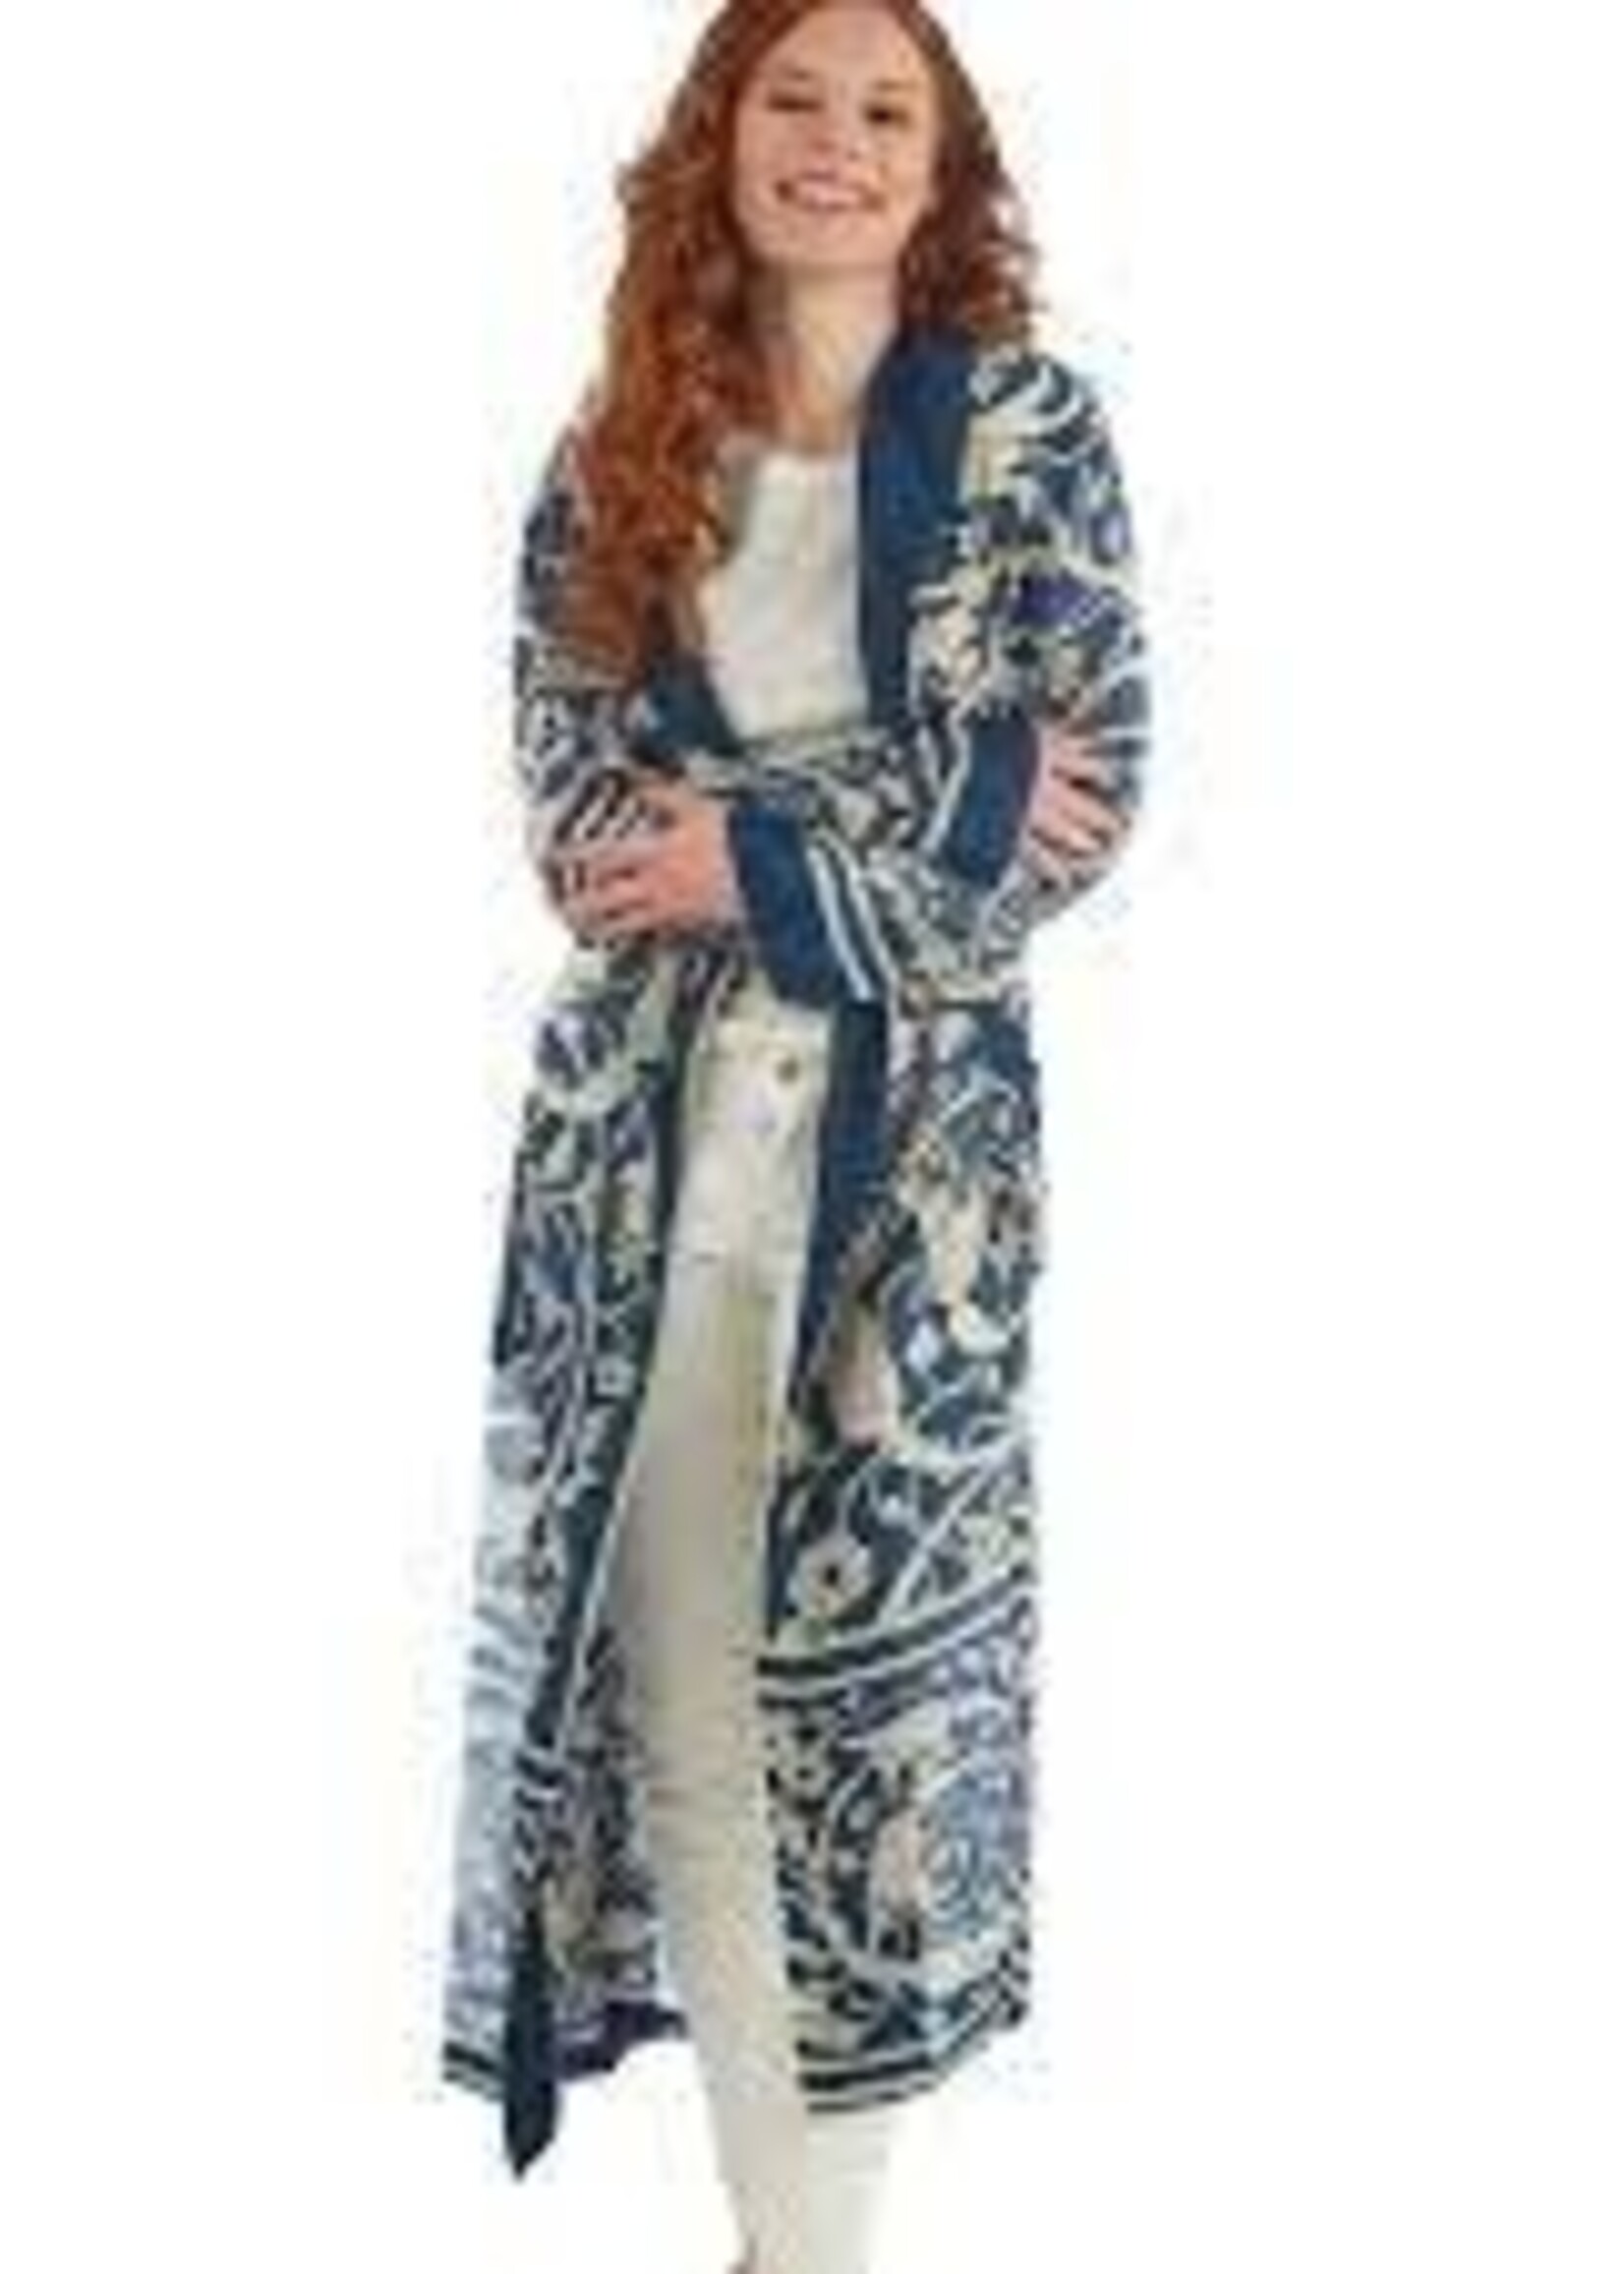 Two's Company 20725-JBP JAIPUR BLUE PRINT ROBE GOWN